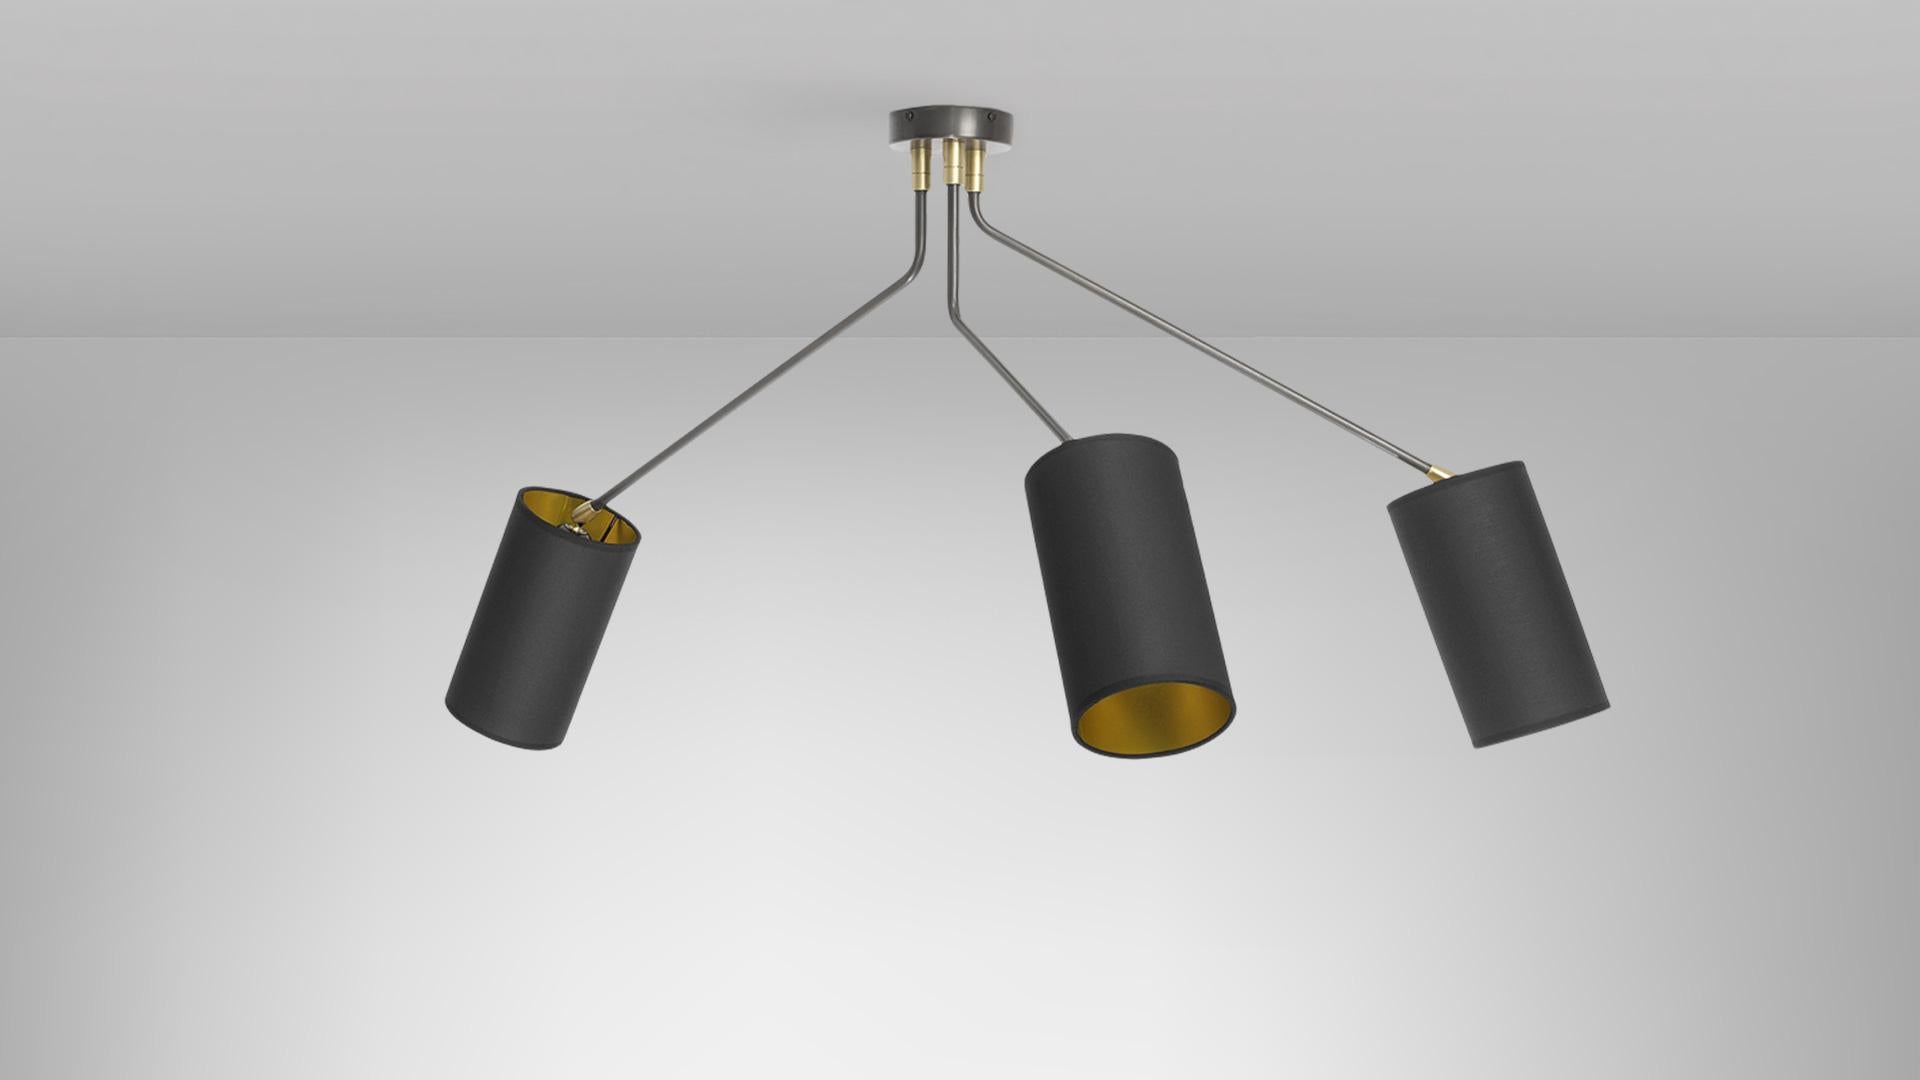 Array Mini cotton pendant light by CTO Lighting
Materials: Bronze with satin brass details, black cotton shades/gold lining 
Dimensions: 80 x H 50 cm

All our lamps can be wired according to each country. If sold to the USA it will be wired for